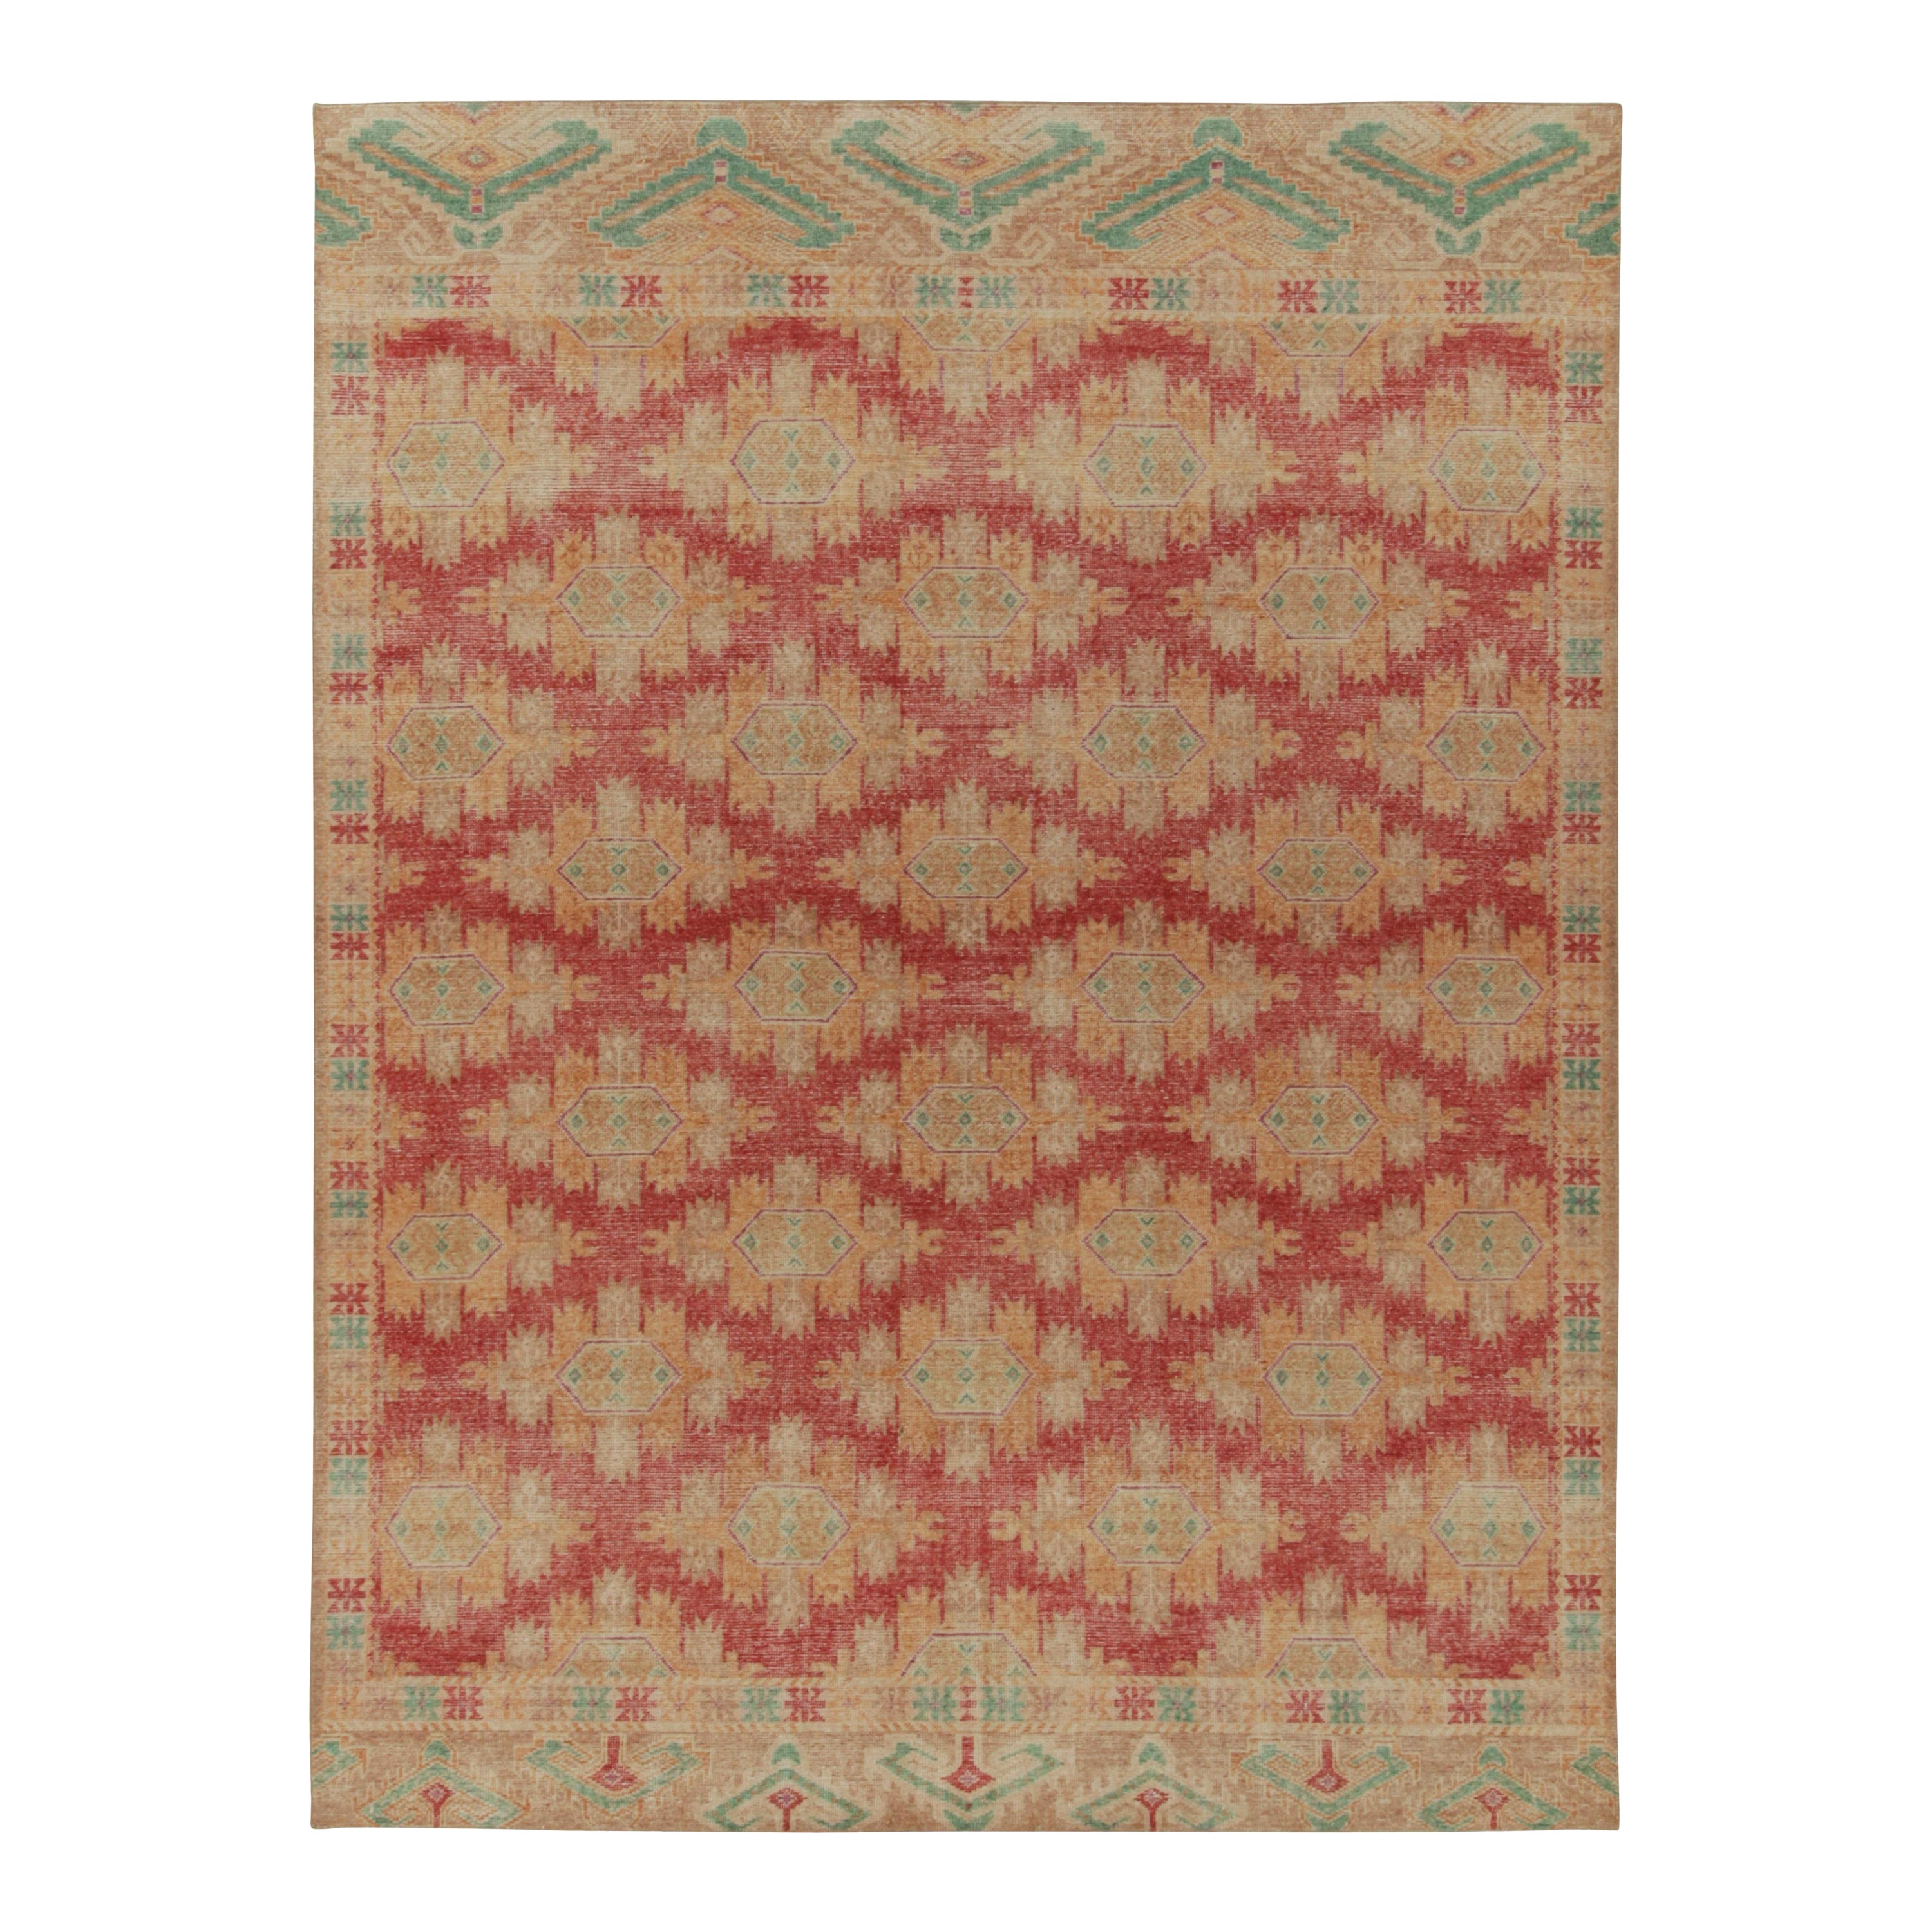 Teppich &amp;amp; Kilims Distressed Bokhara-Teppich in Rot, Beige und Gold mit Medaillons